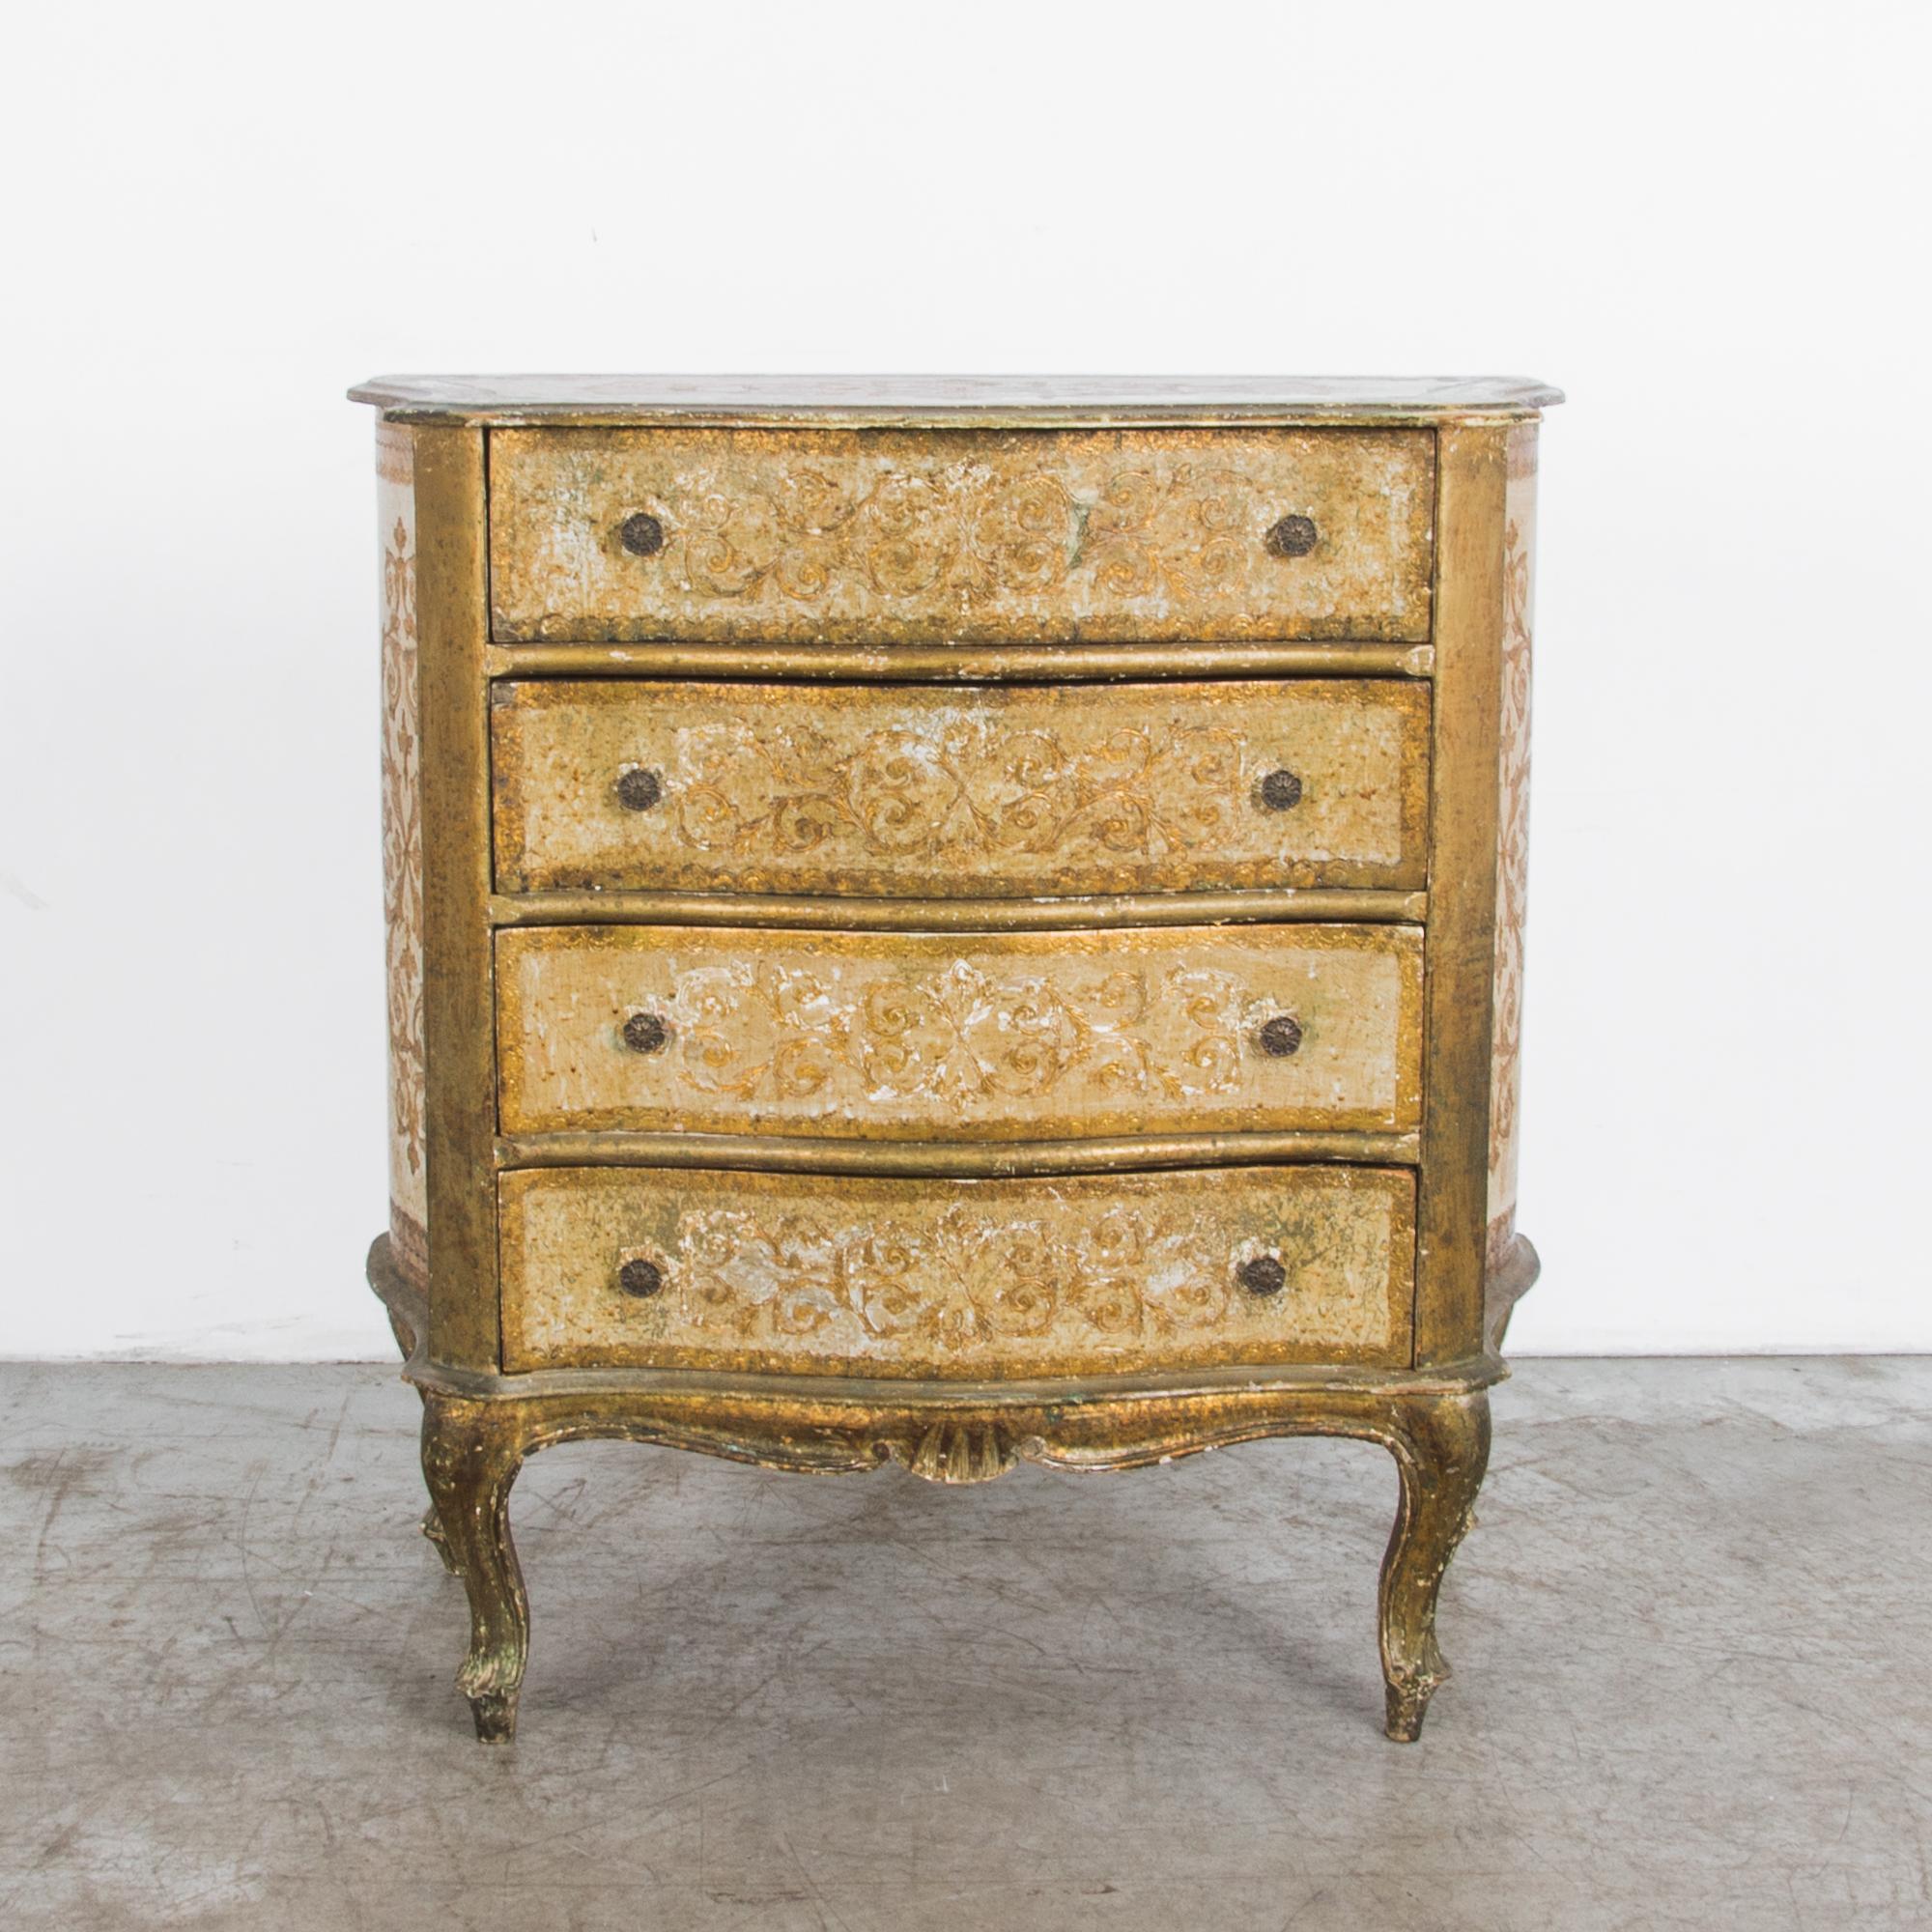 A gilded wooden chest of drawers from Italy, circa 1960. Elegantly aged, a refined shape is contrasted with a textured patina and elaborate carved ornament.

The four pull-out drawers have a gentle serpentine curve, echoed by curving side panels,